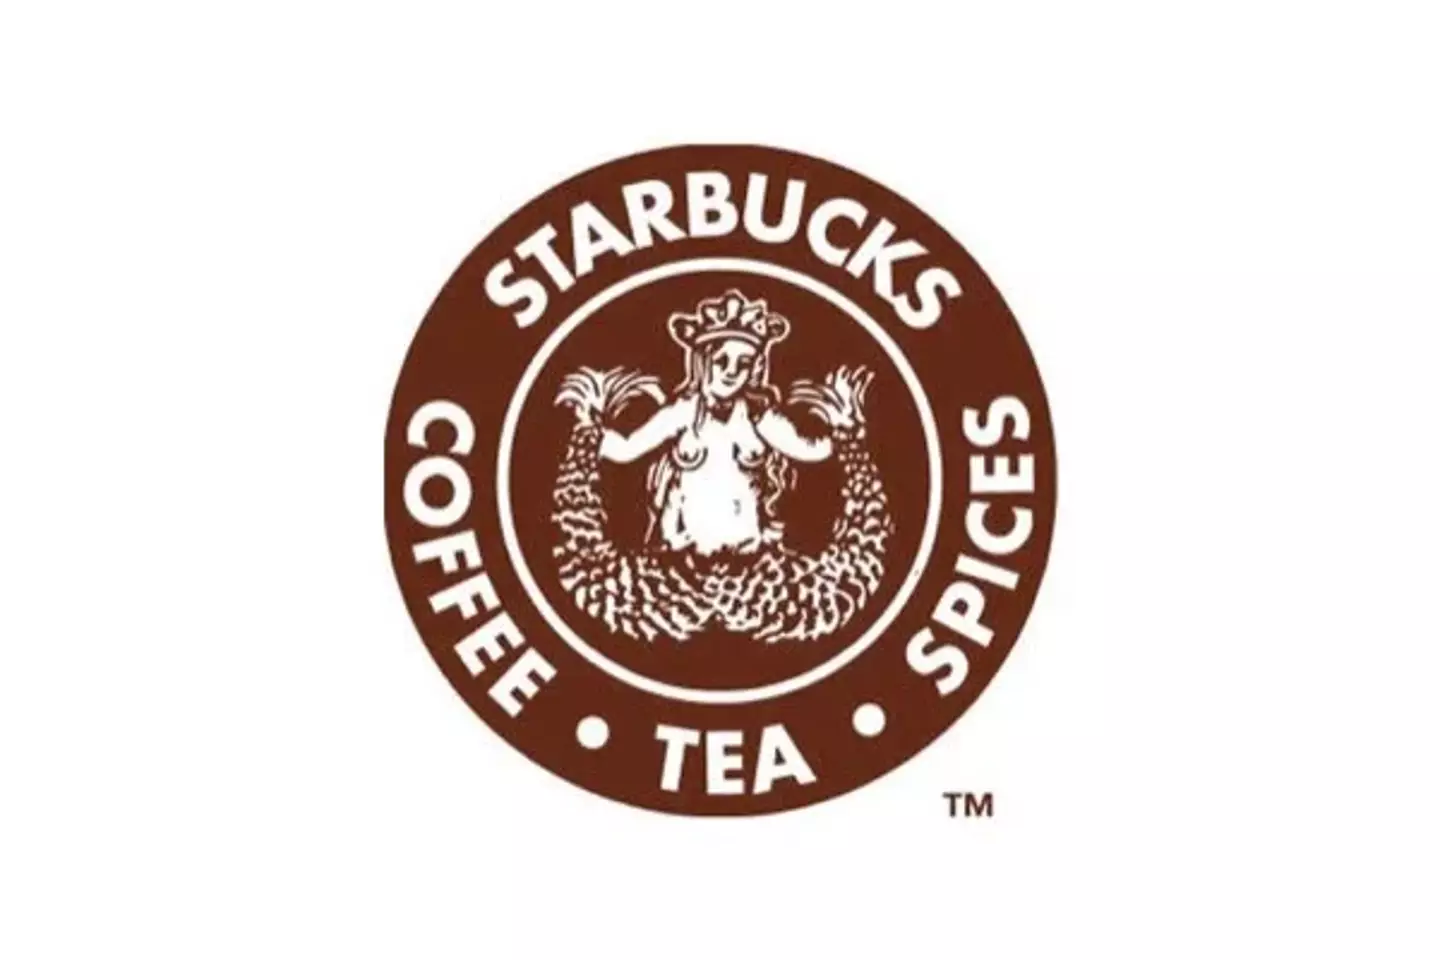 The original Starbucks logo was a less than appealing brown print that showcased a zoomed-out image of a topless twin-tailed mermaid (Tailor Brands).